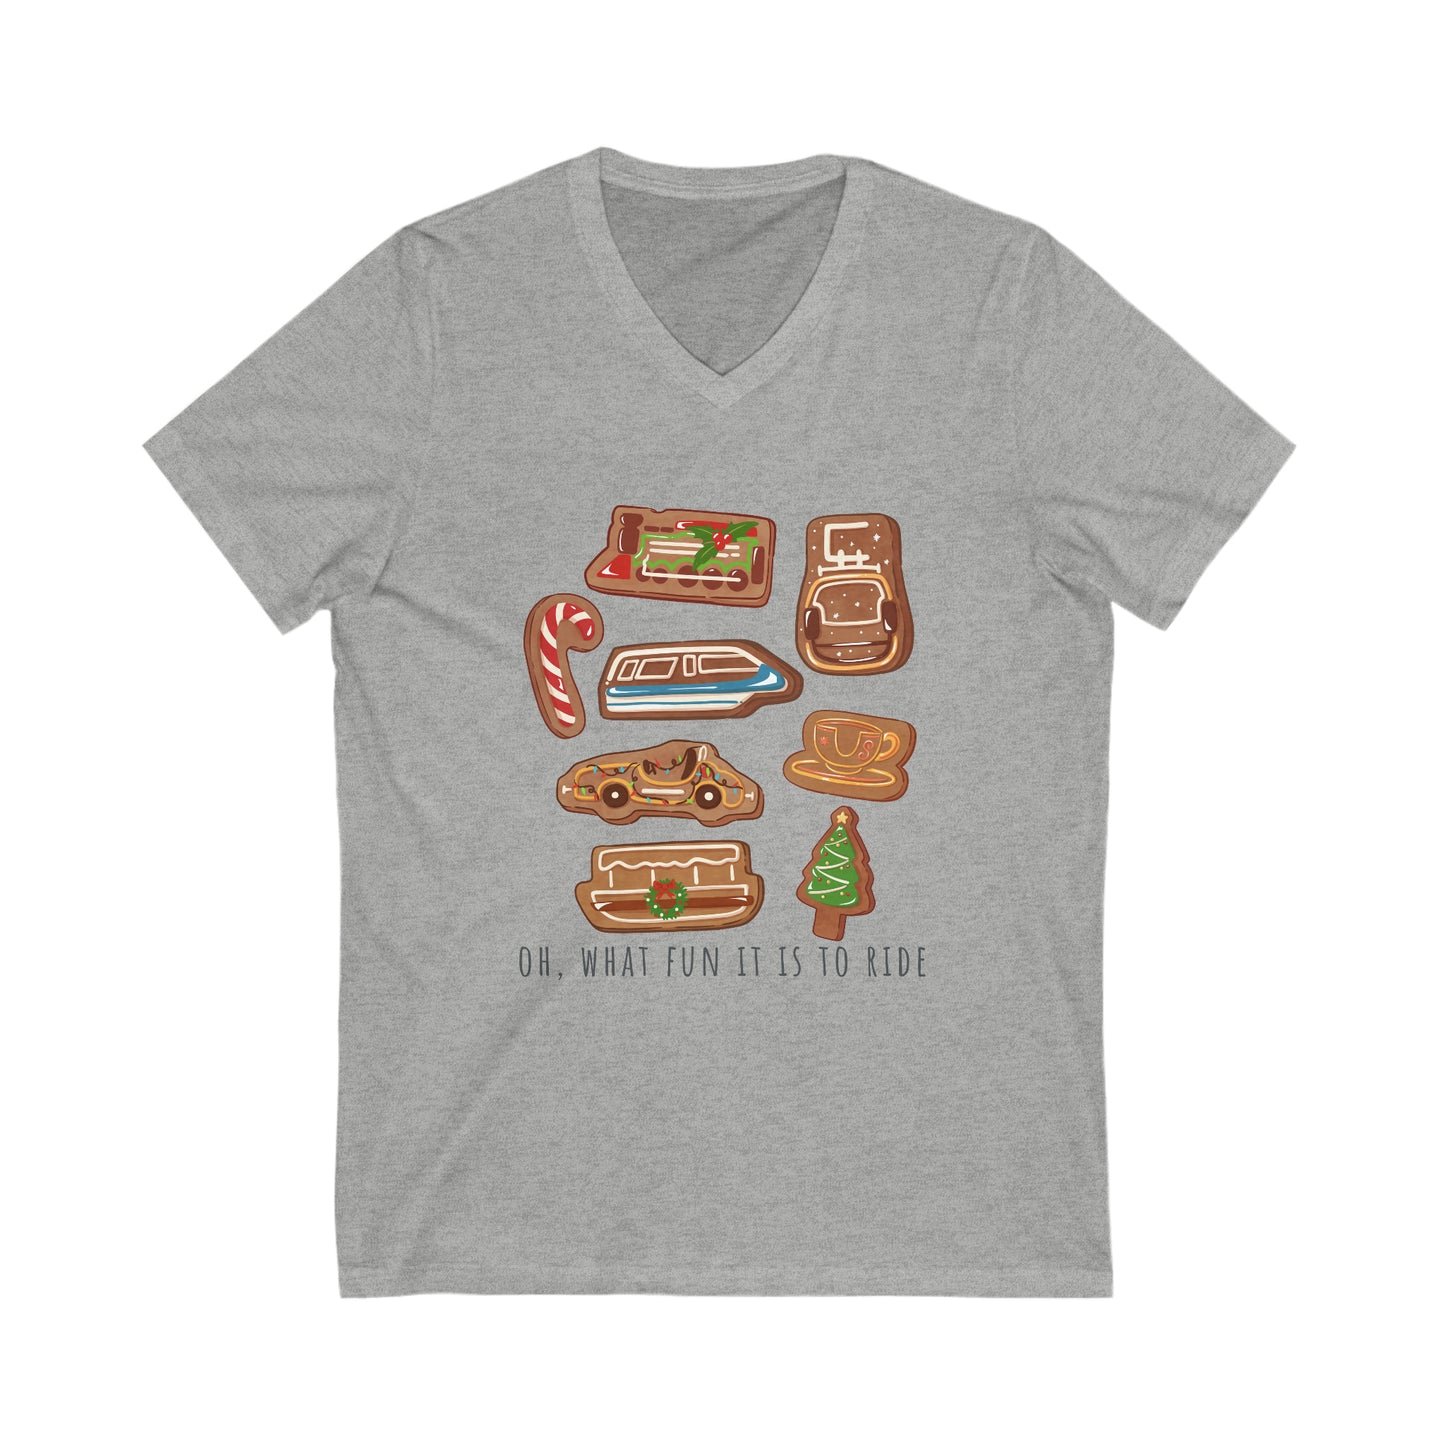 Oh What Fun it is to Ride Unisex Short Sleeve V-Neck Tee